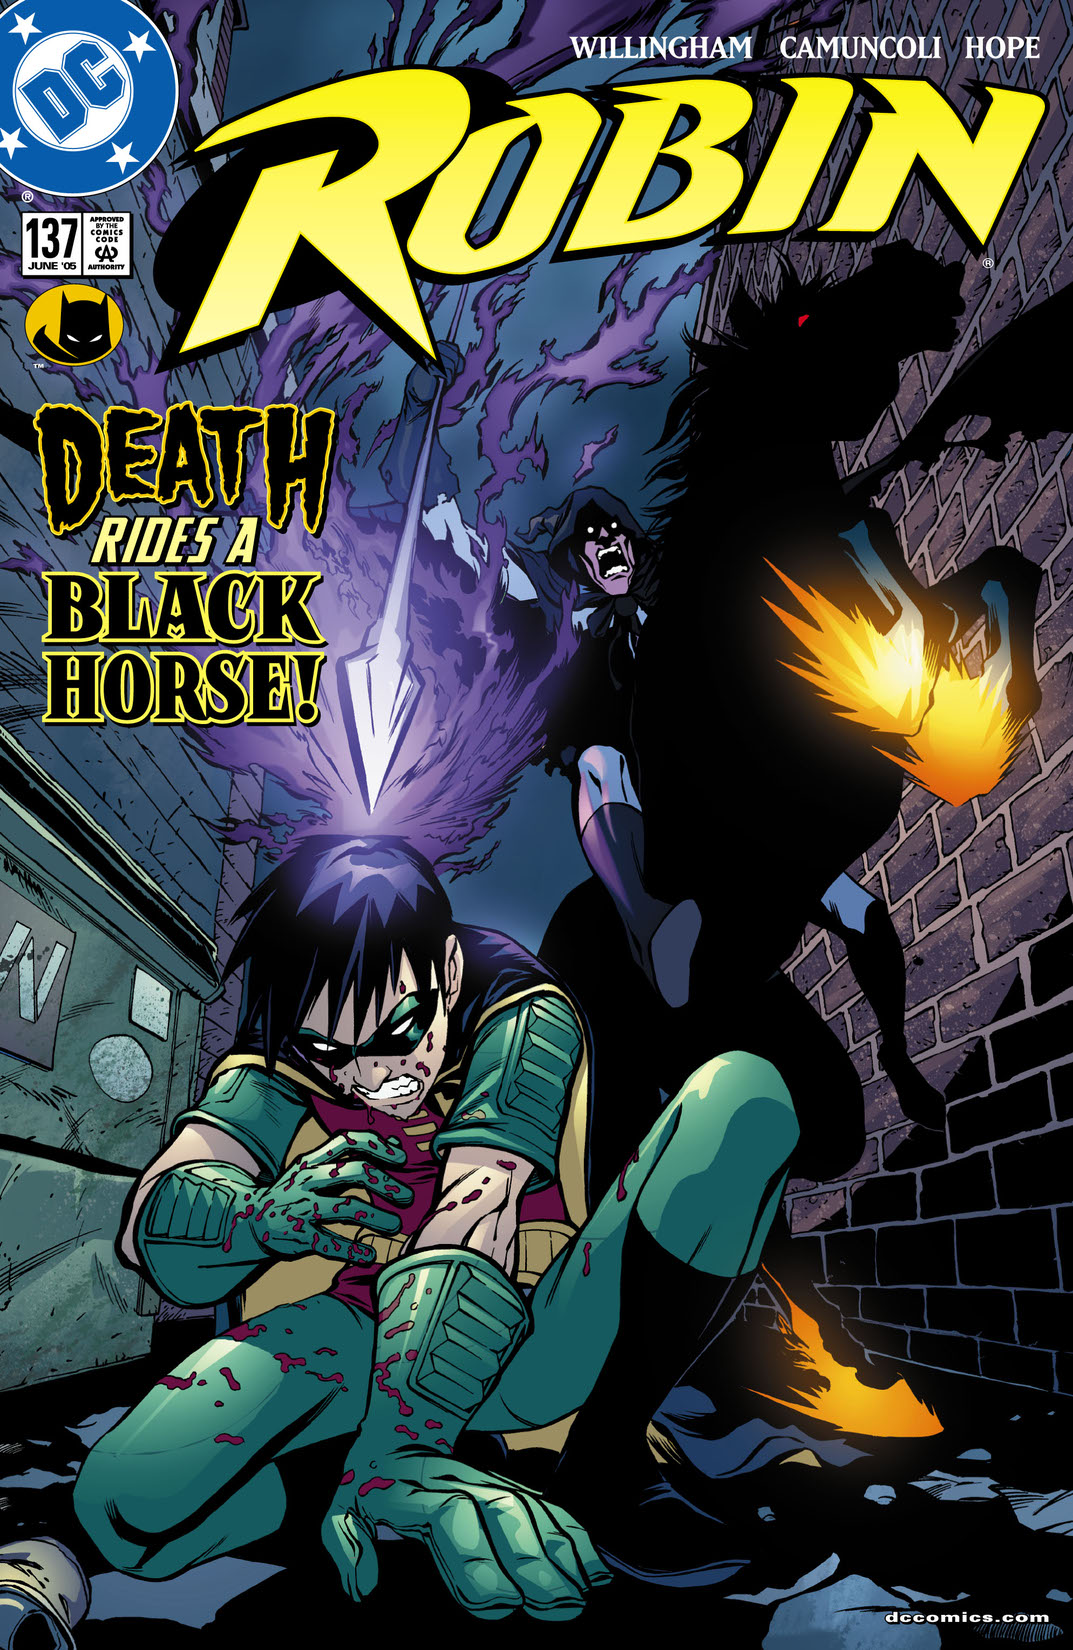 Robin (1993-) #137 preview images